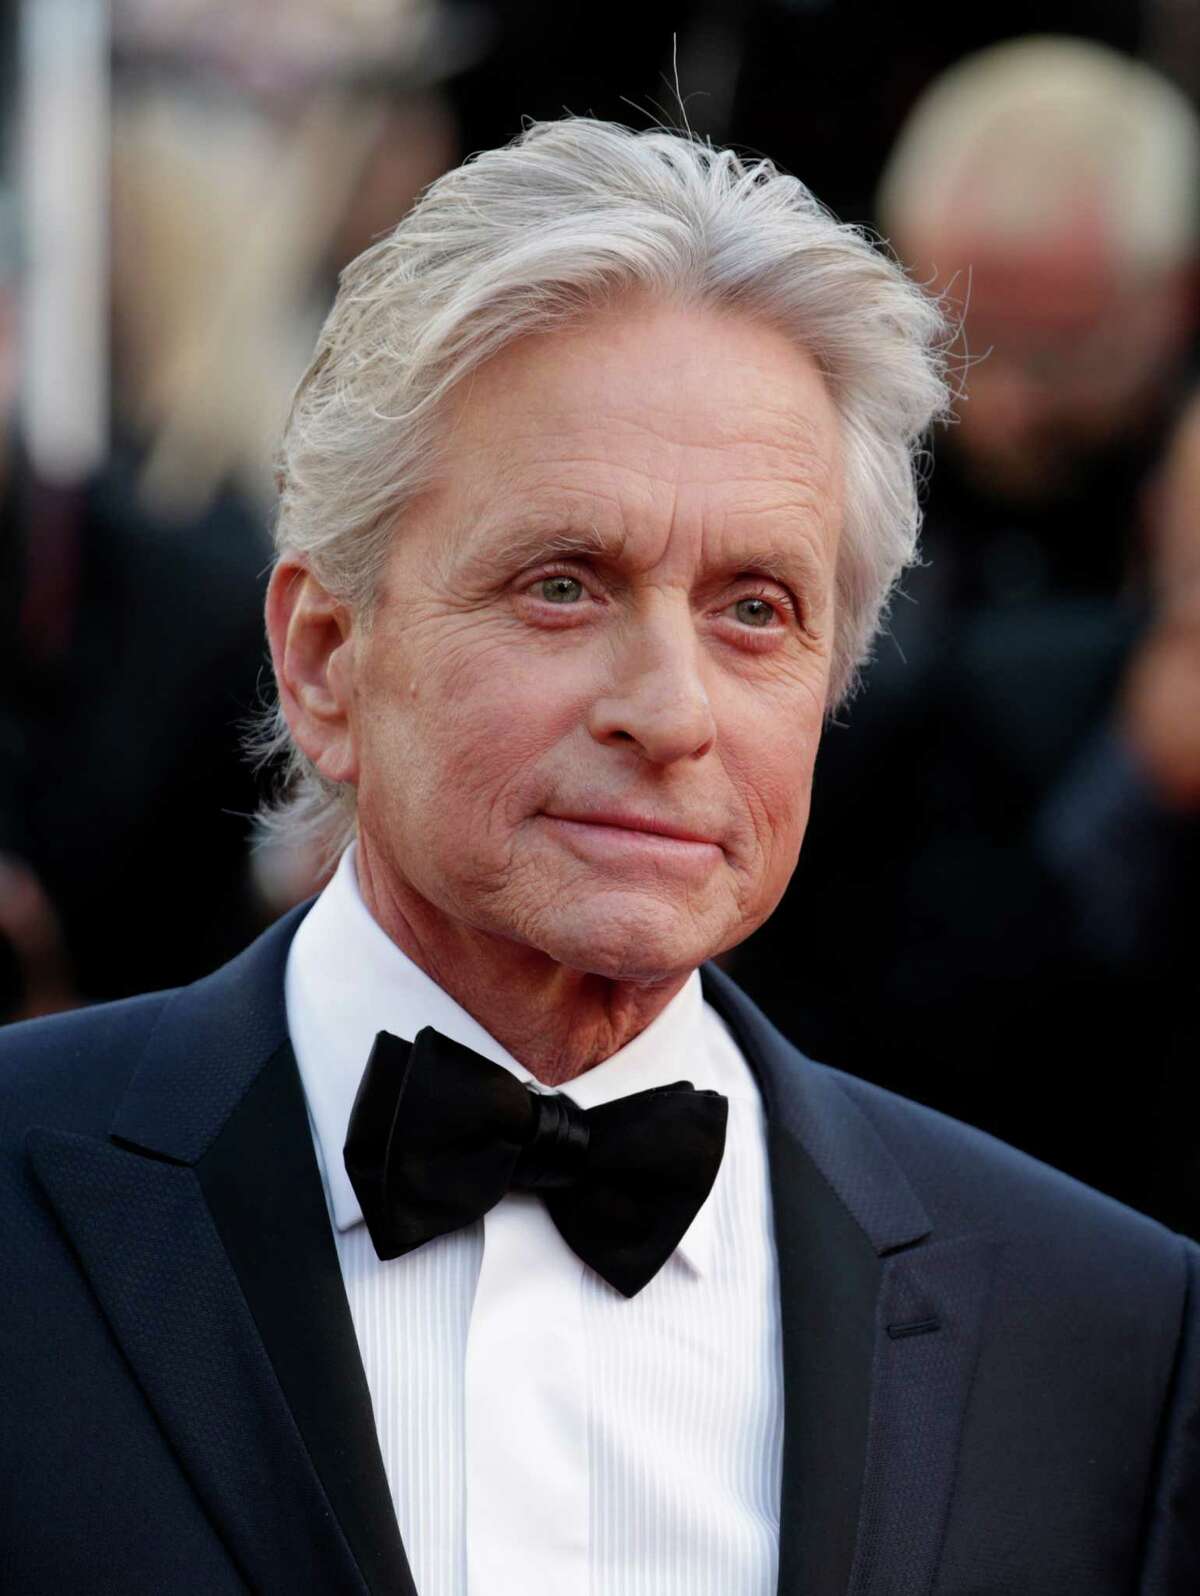 Actor Michael Douglas at the screening of Behind the Candelabra at the 66th international film festival, in Cannes, southern France, May 21, 2013.